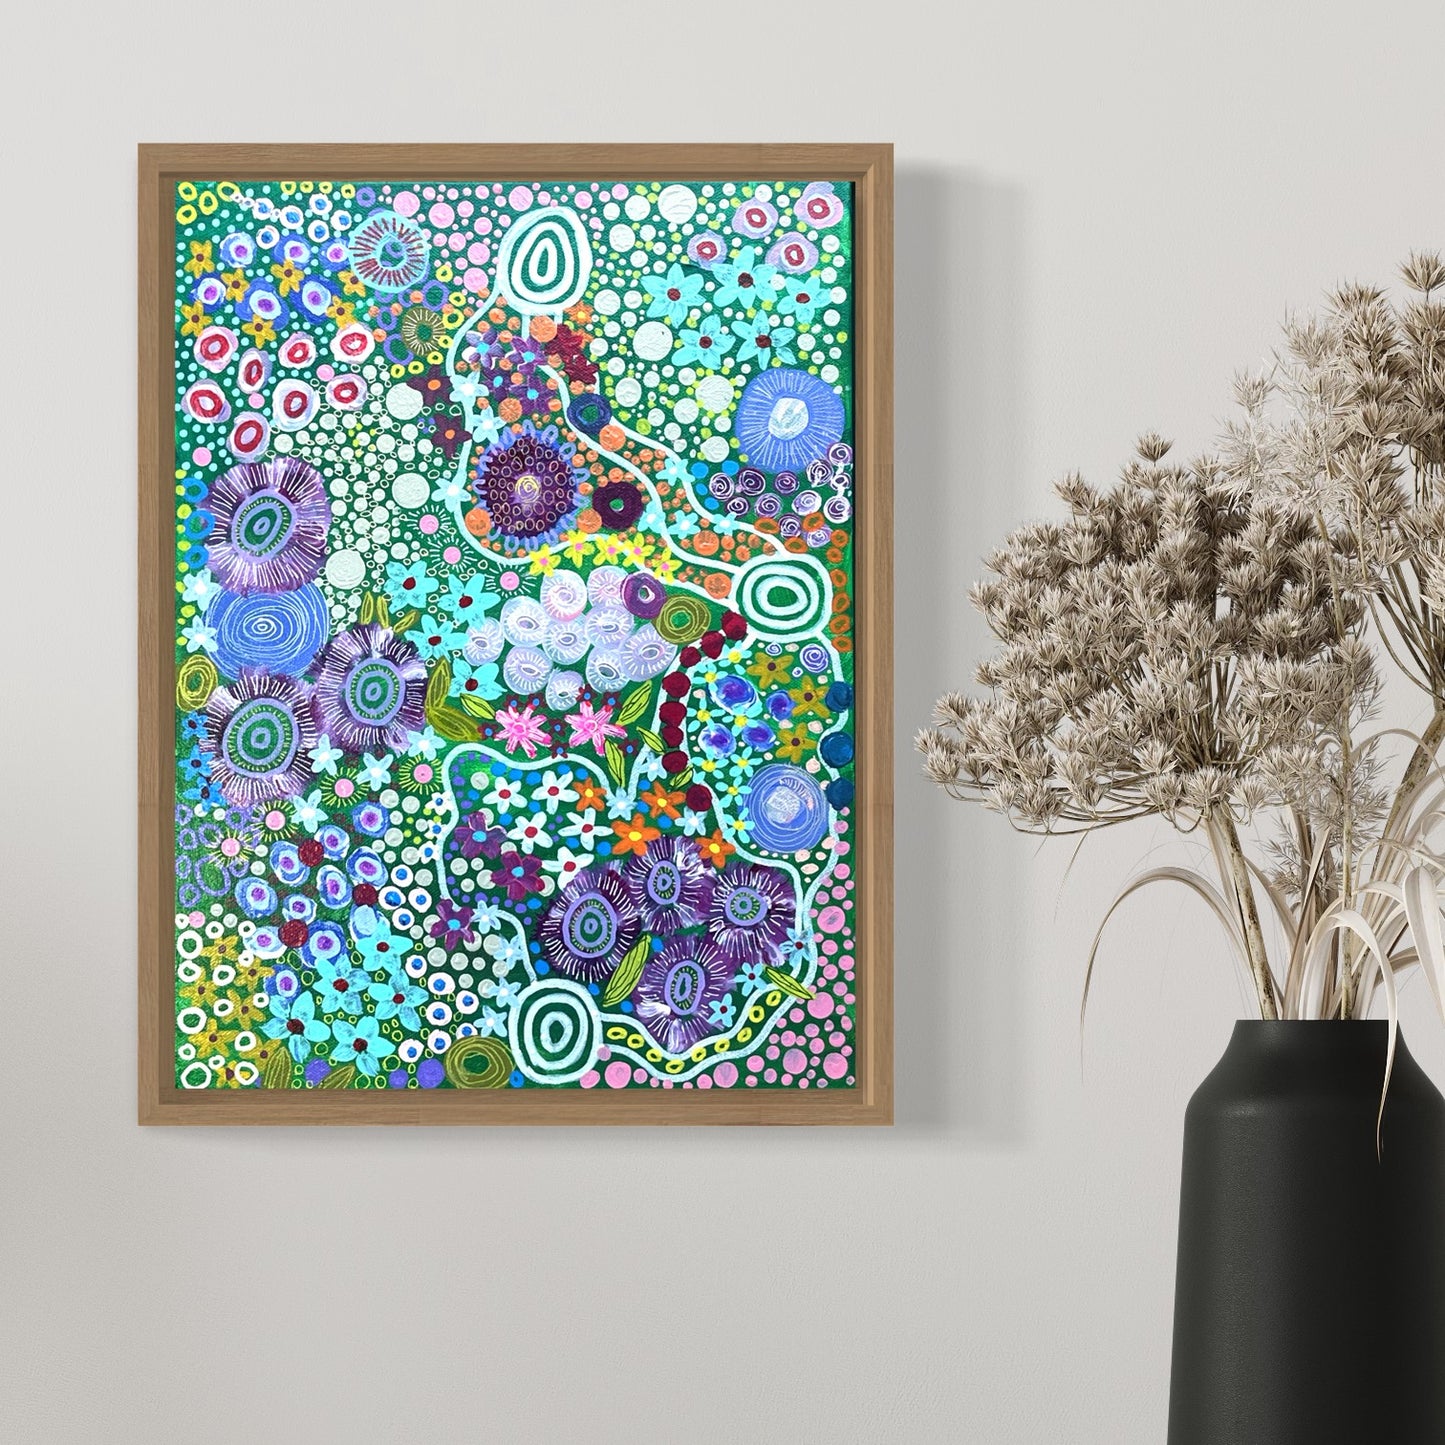 Aboriginal Art | Girrawiiny [Wiradjuri for a Quiet Place with Pretty Flowers] | One-of-a-Kind Original Painting